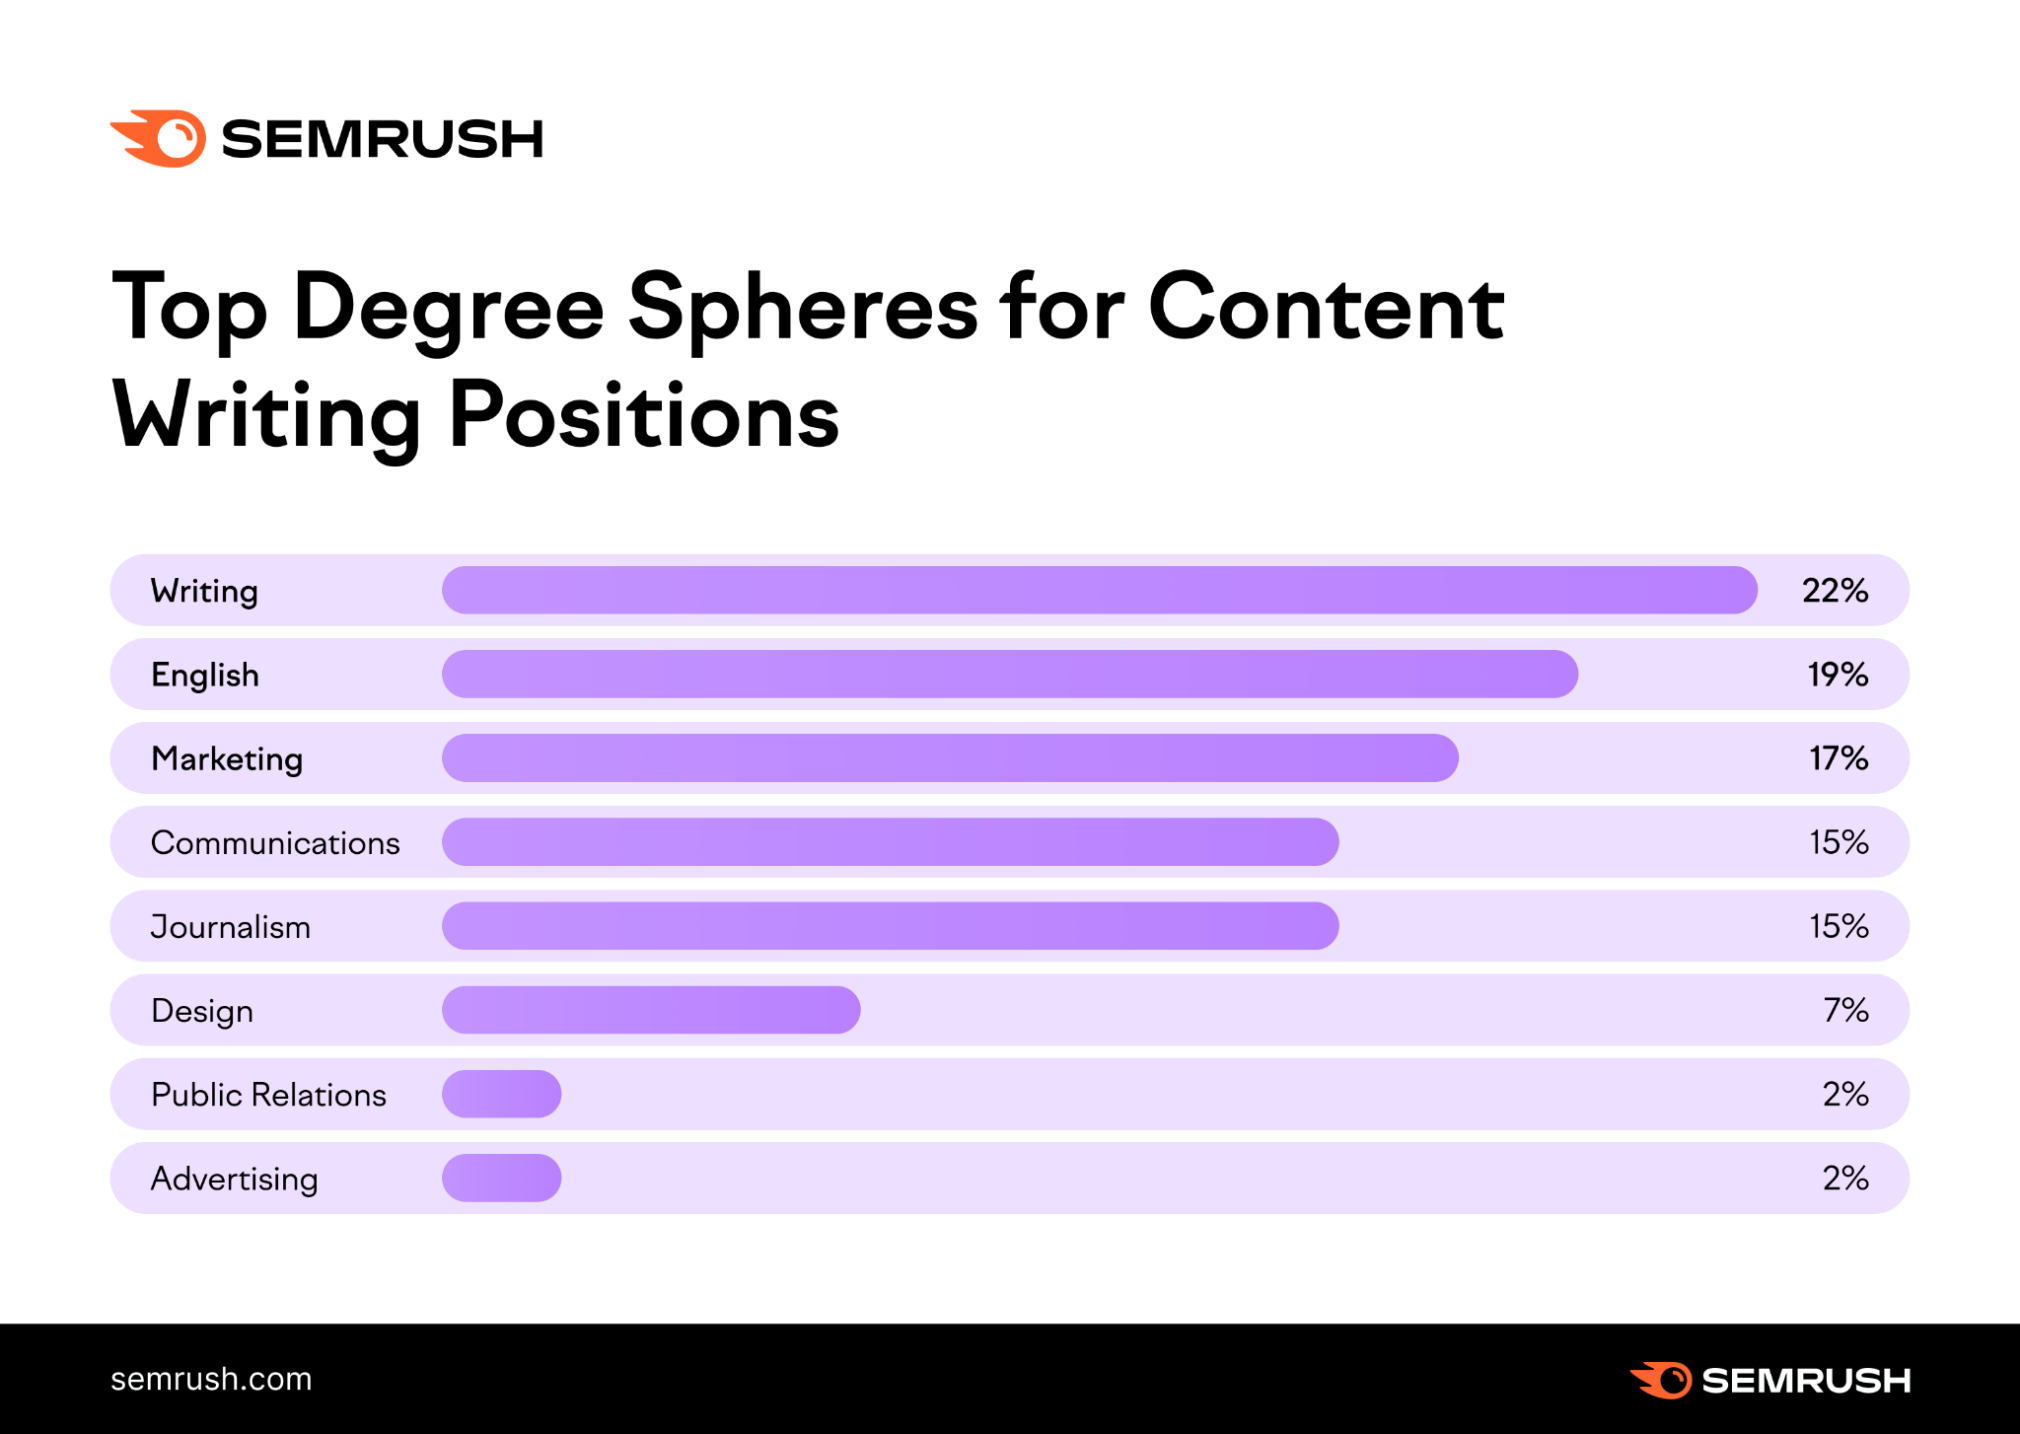 Top degree spheres for content writers